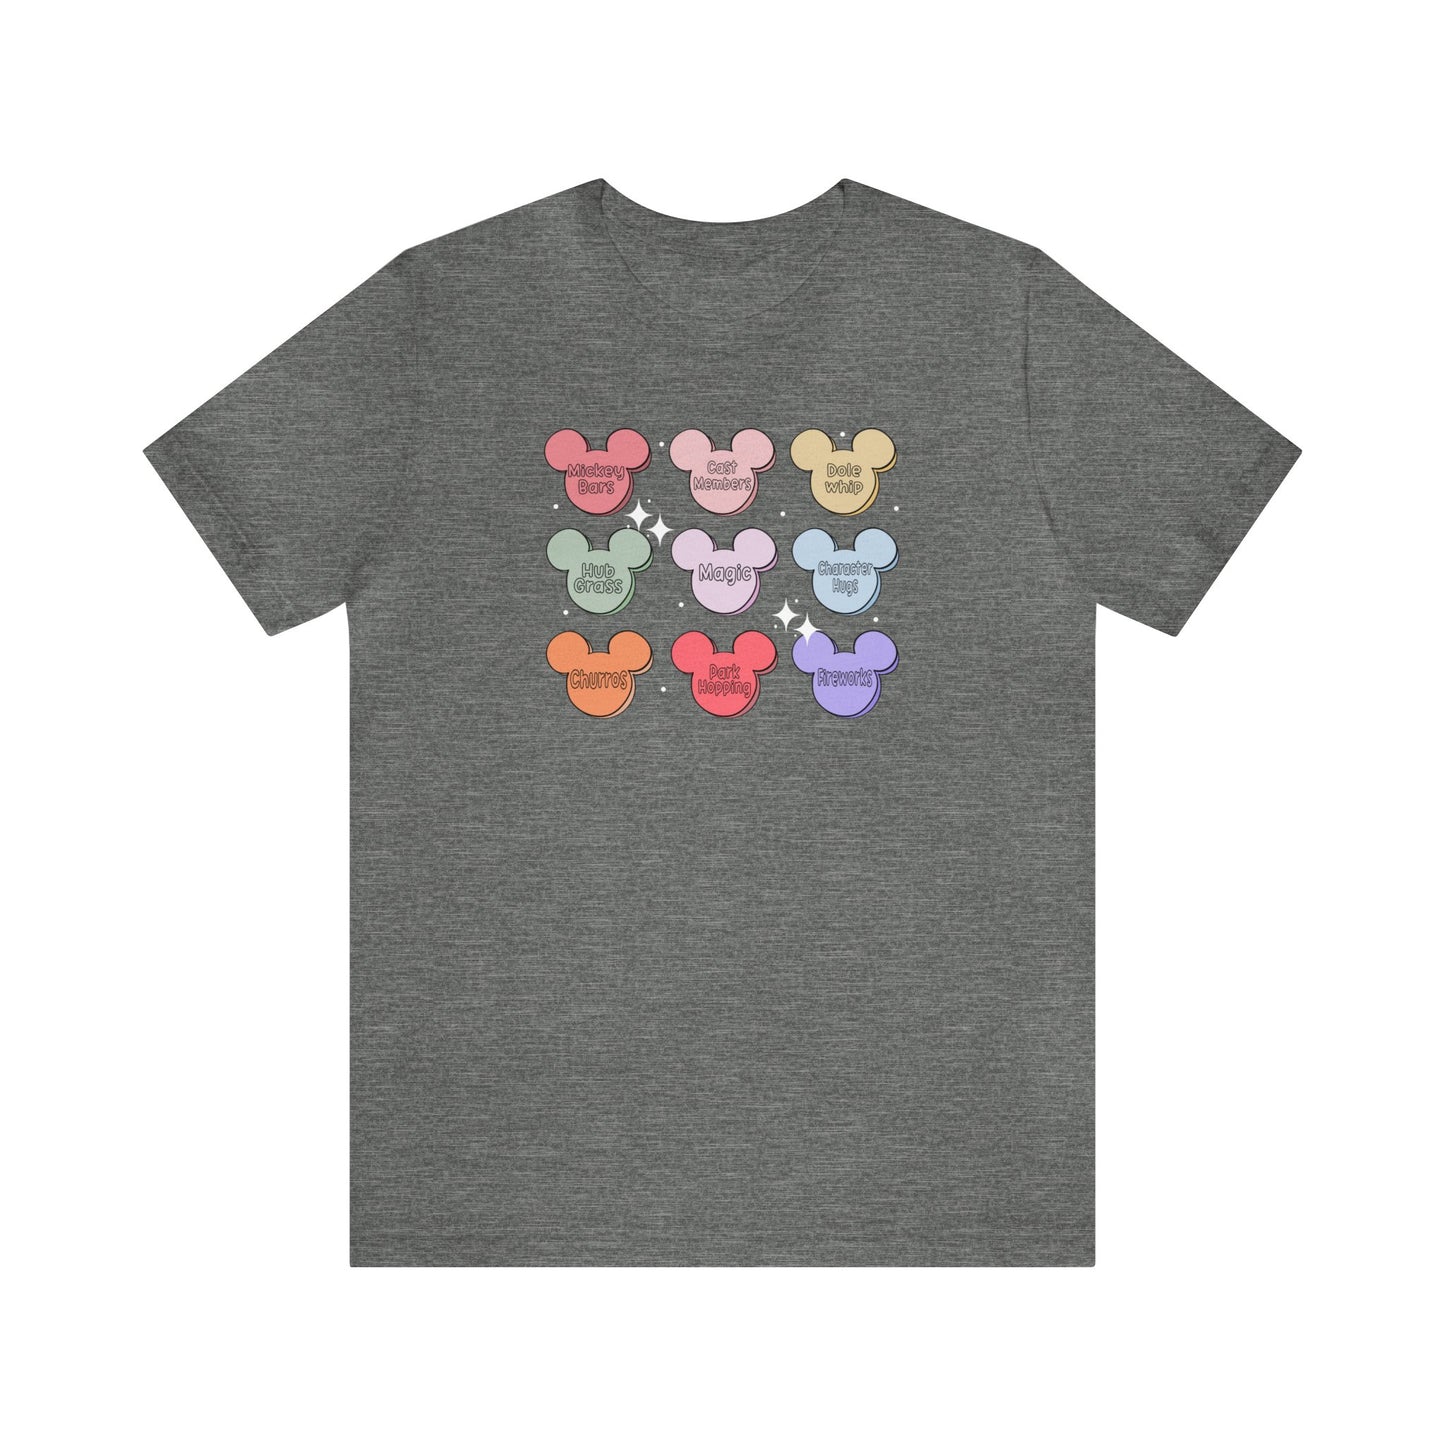 Favorite Candy Hearts Adult Unisex Tee